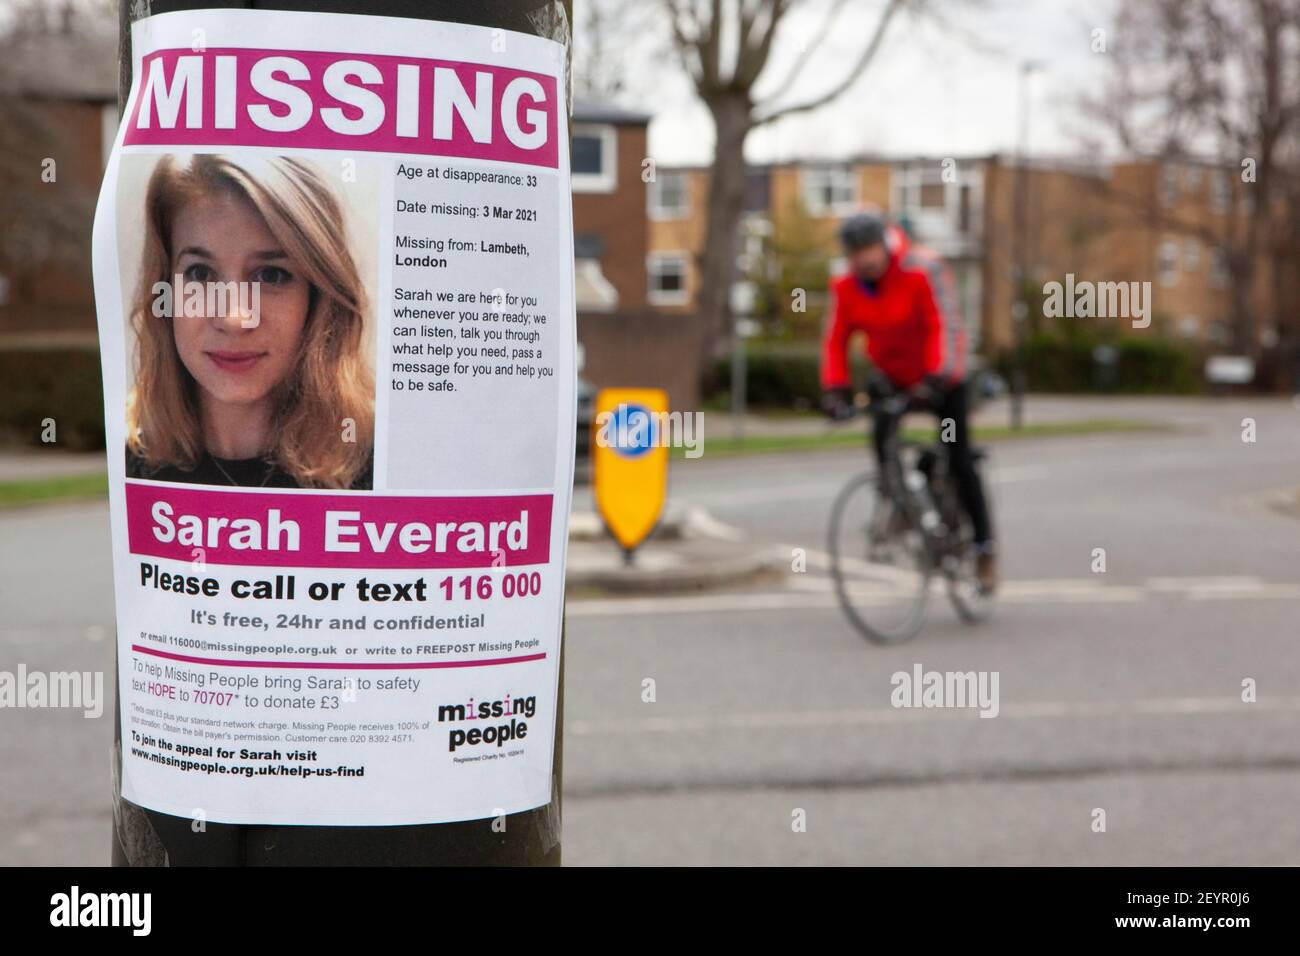 London, UK, 6 March 2021: A missing woman, 33 year old Sarah Everard, hasn't been since sine the evening of Wednesday 3 March 2021. Last known to be walking from Clapham Junction towards Brixton, posters have been put up in the area. Members of the public are asked to call 116 000 if they have seen her. Anna Watson/Alamy Live News Stock Photo